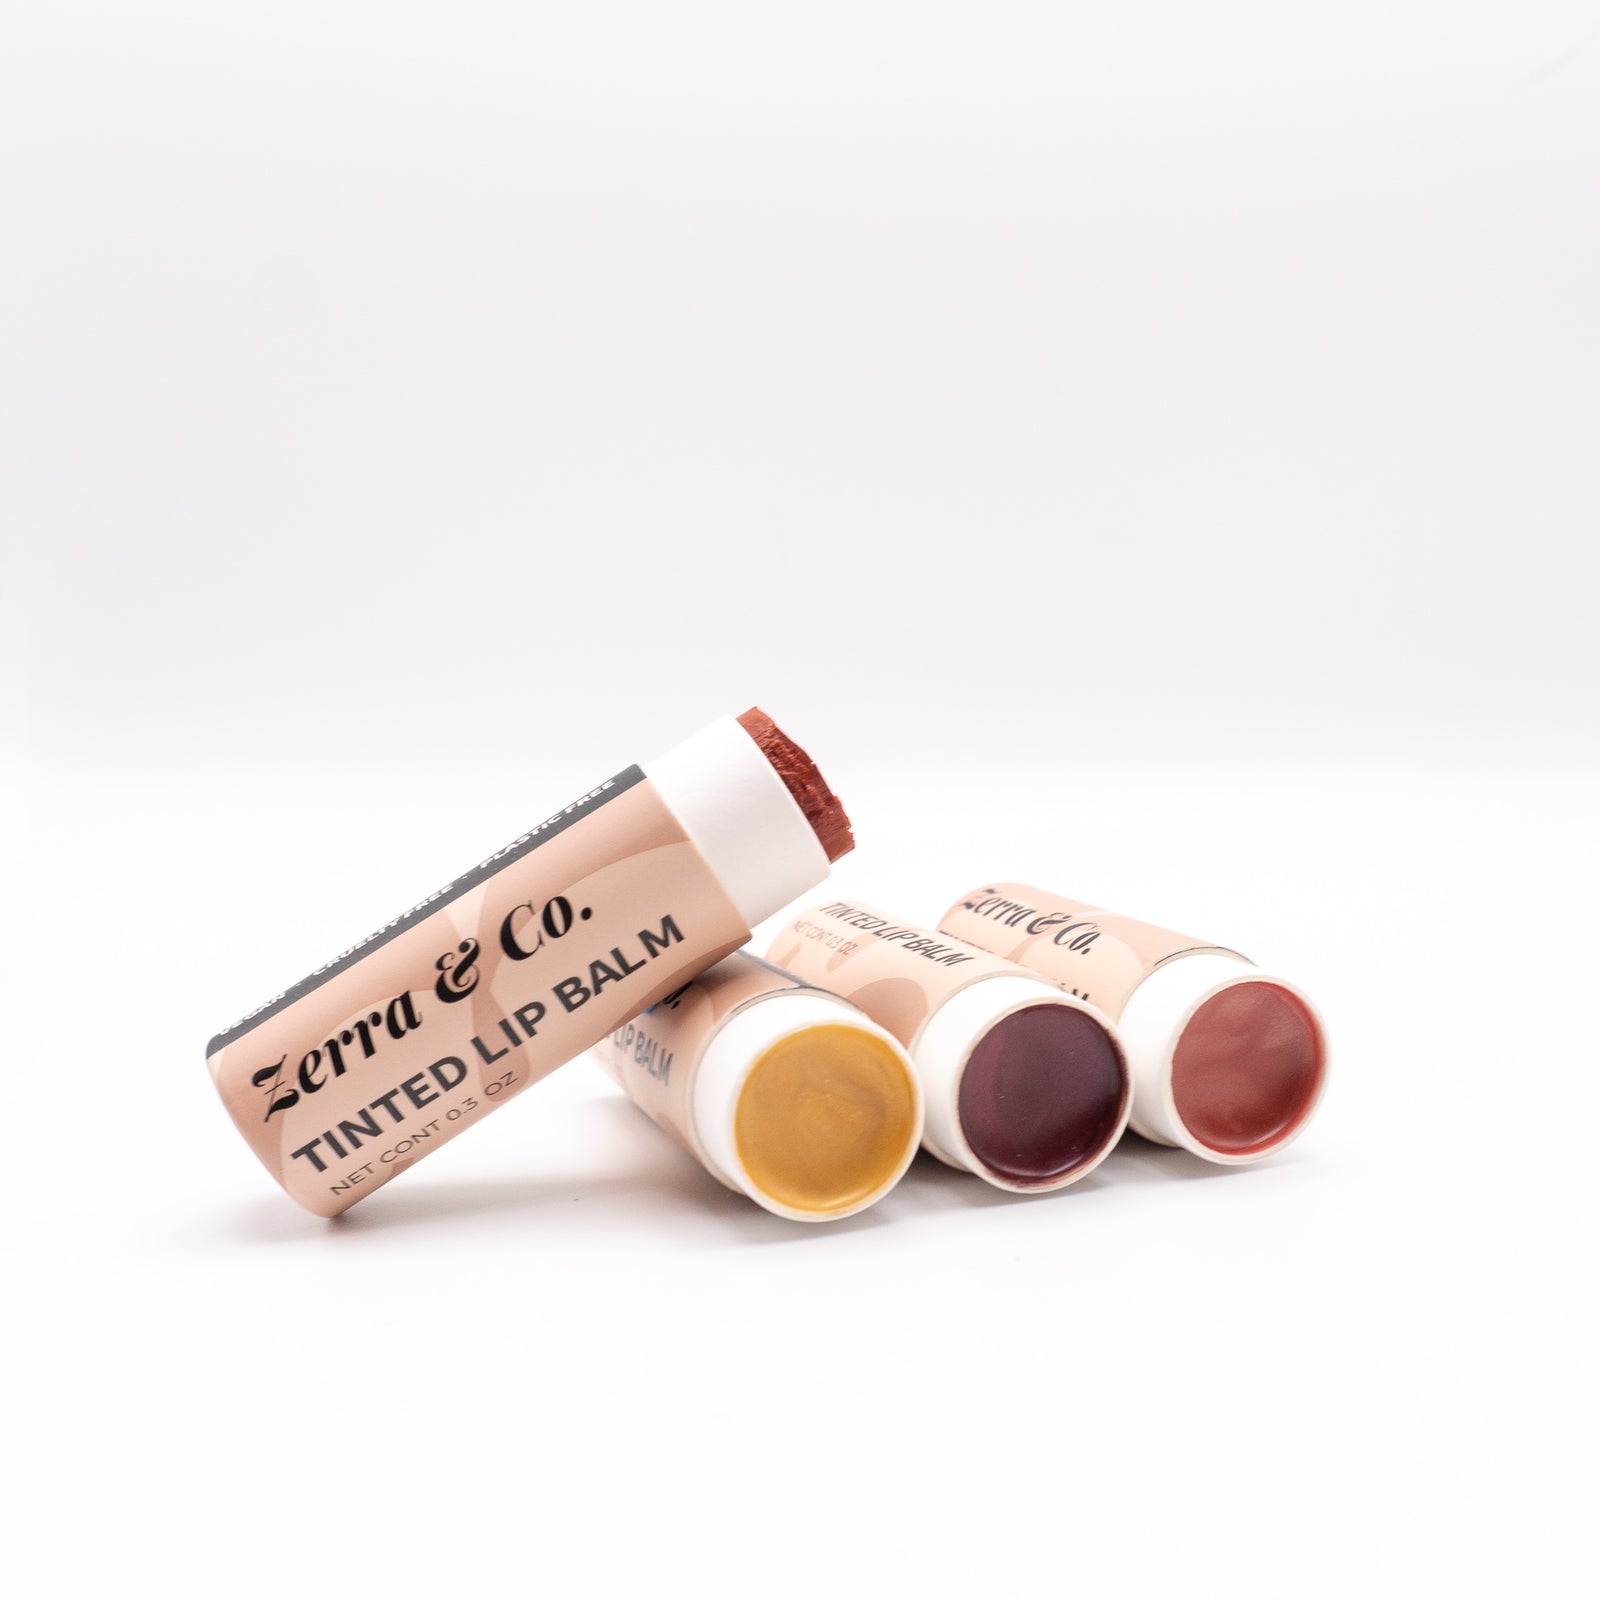 4 Ways to Use Our Tinted Balm as a Multi-Stick